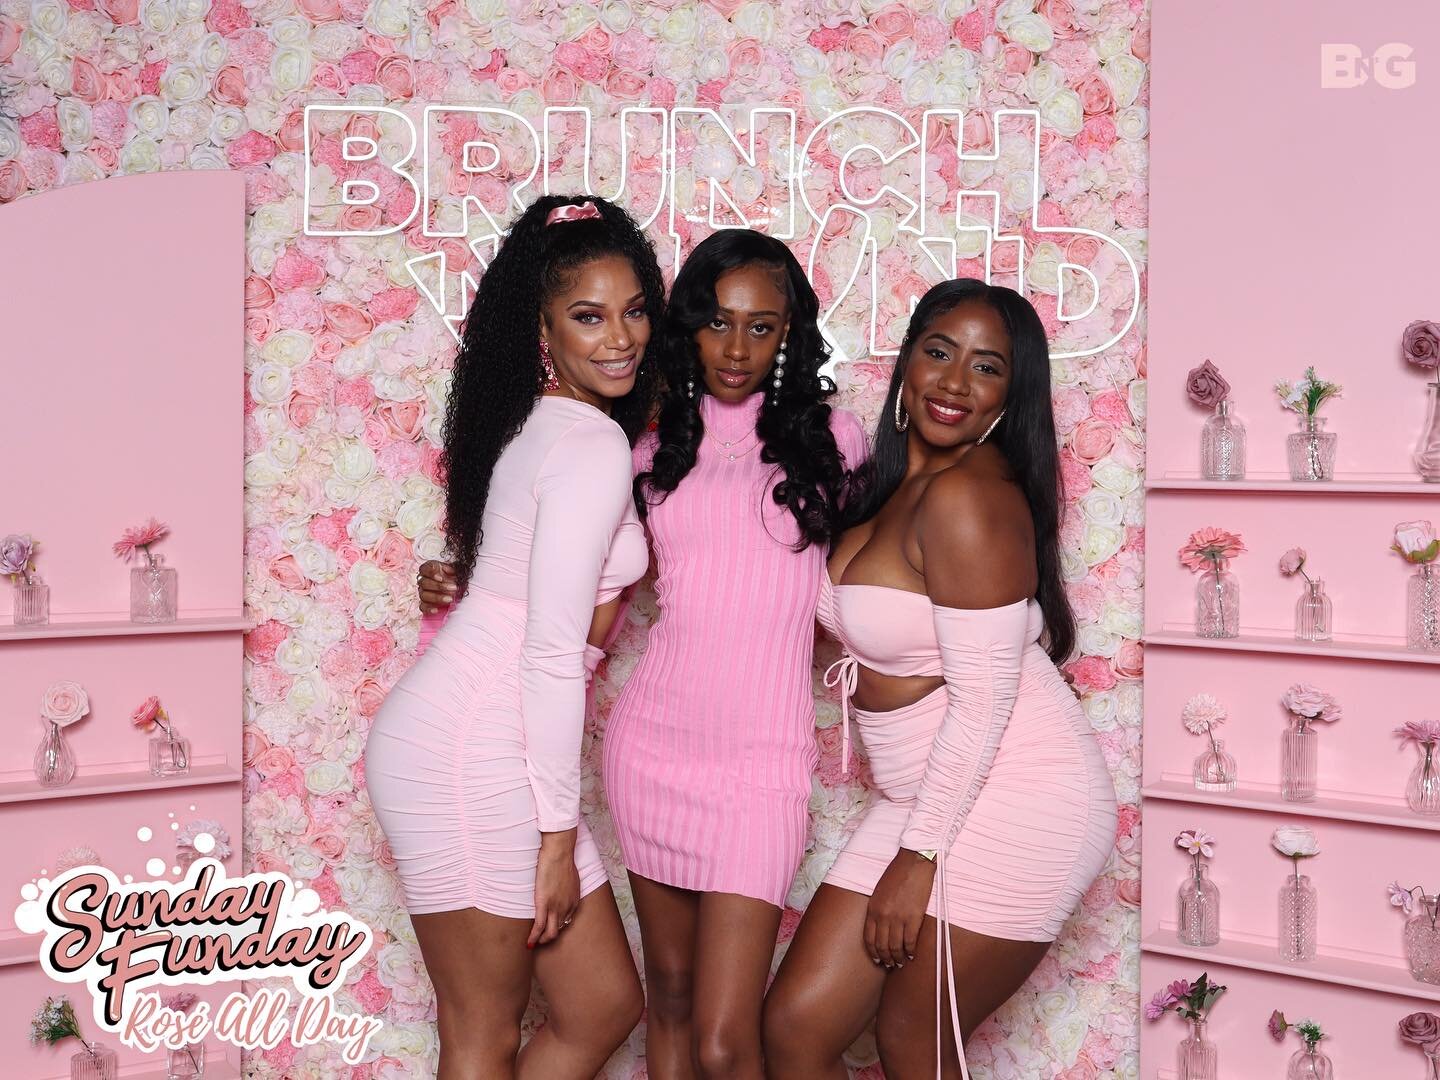 Reminiscing on last month&rsquo;s Sunday Funday! Ros&eacute; All Day🌸🥂#brunchngrind